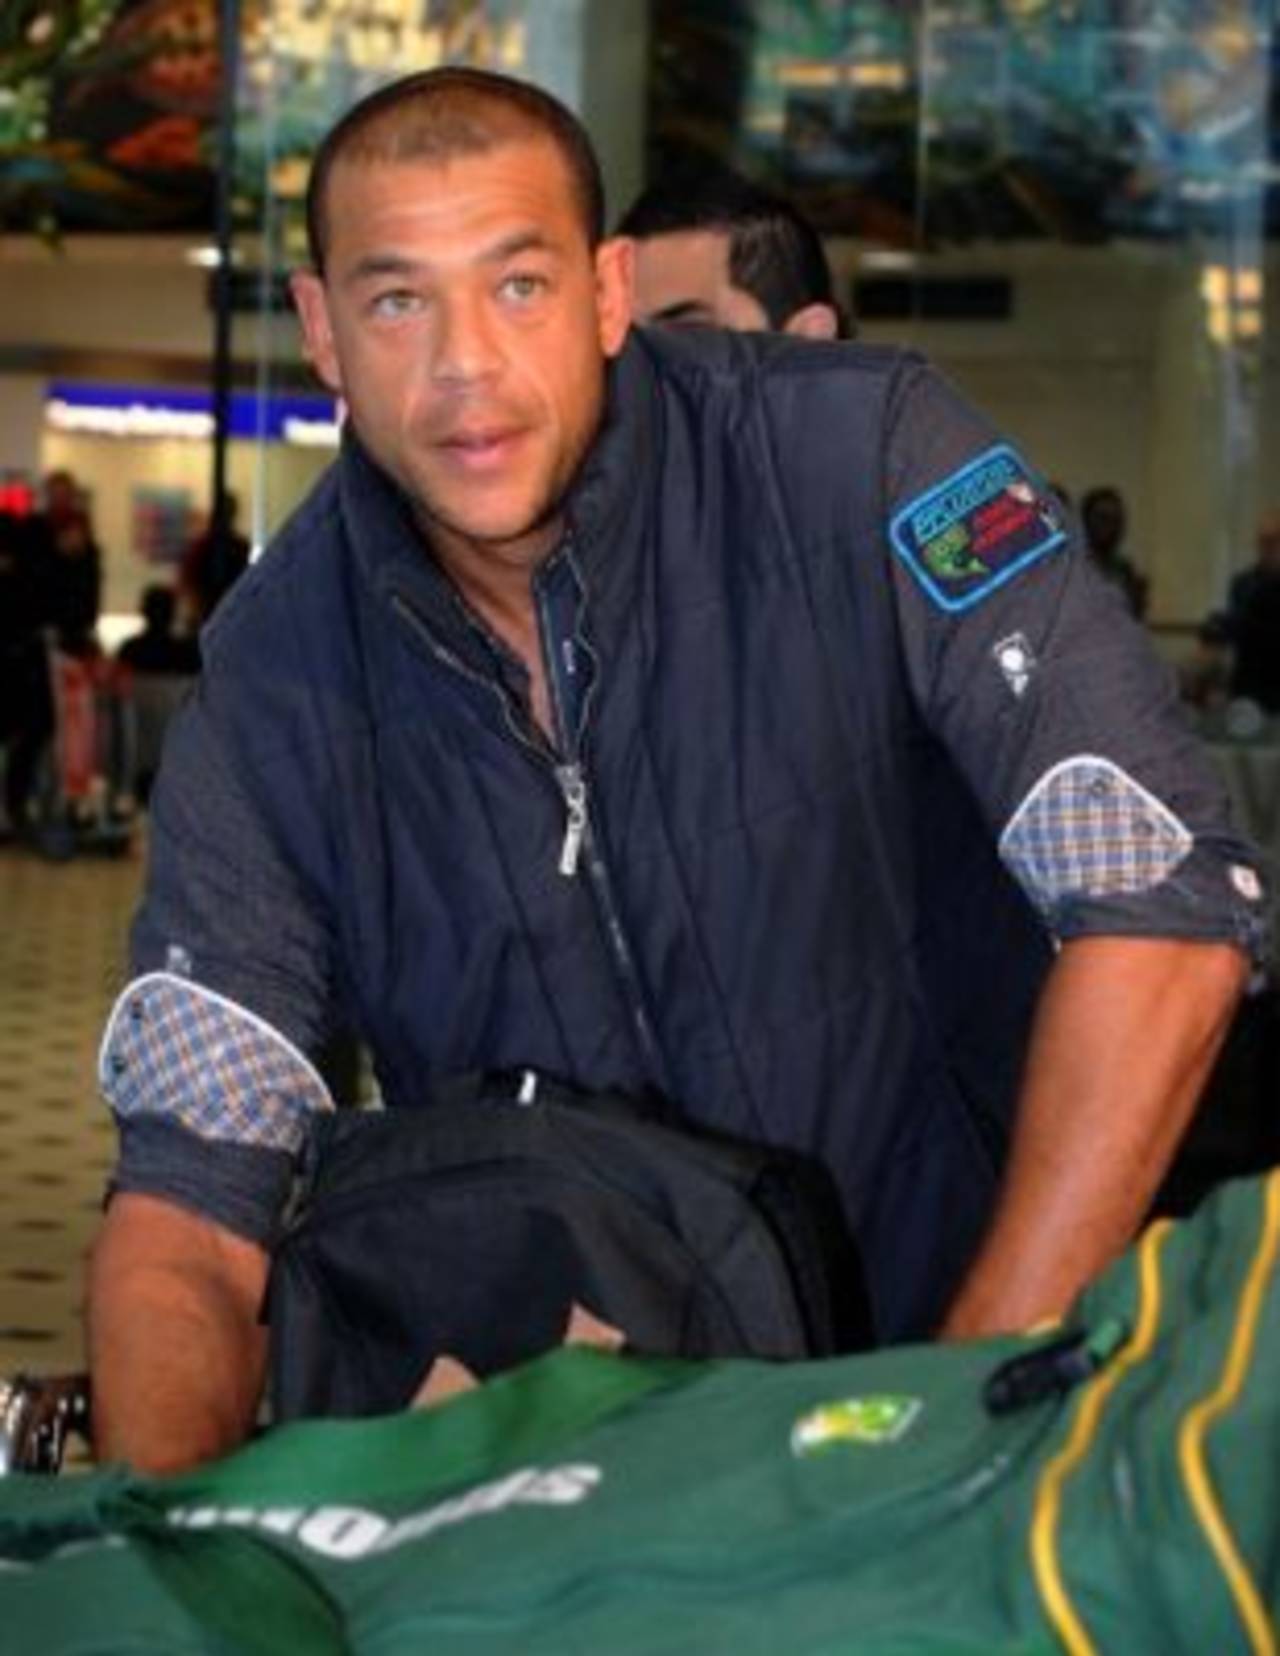 Andrew Symonds at the Brisbane international airport. Will he be part of the Australian side again? June 6, 2009